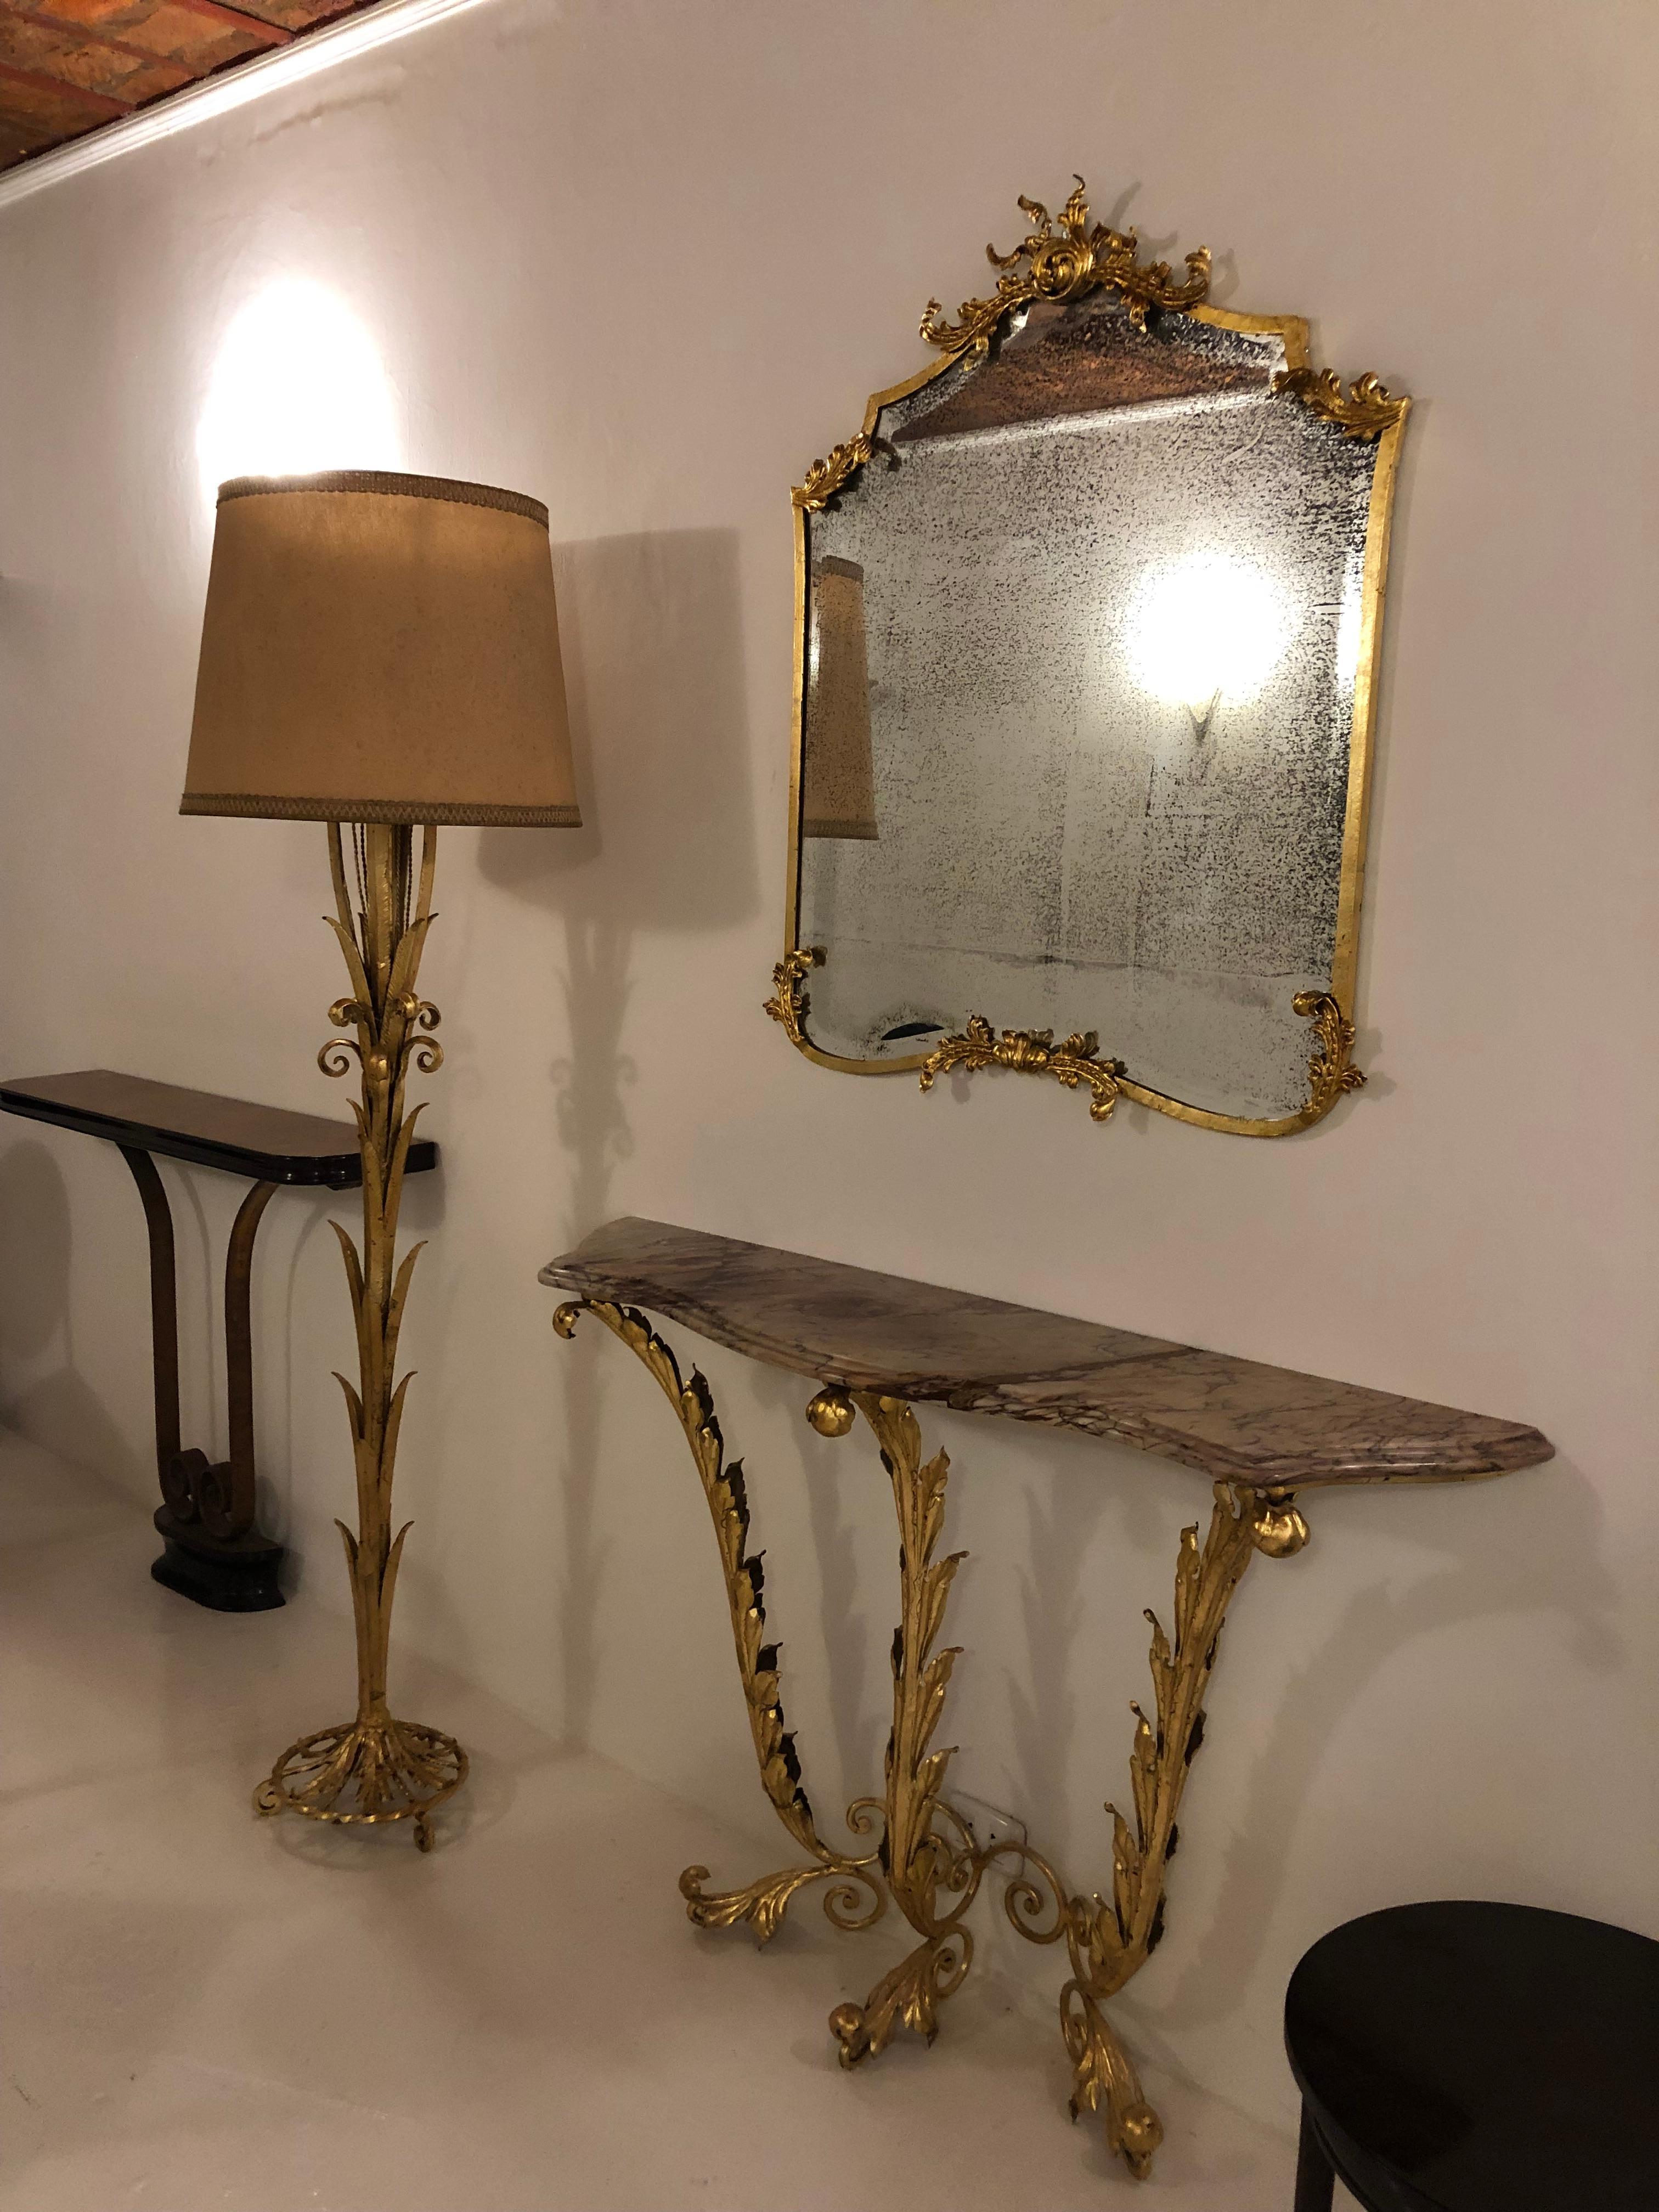 Floor lamp Jugendstil, Art Nouveau, Liberty

Materials: iron and gold leaf
You want to live in the golden years, those are the floor lamps that your project needs.
We have specialized in the sale of Art Deco and Art Nouveau styles since